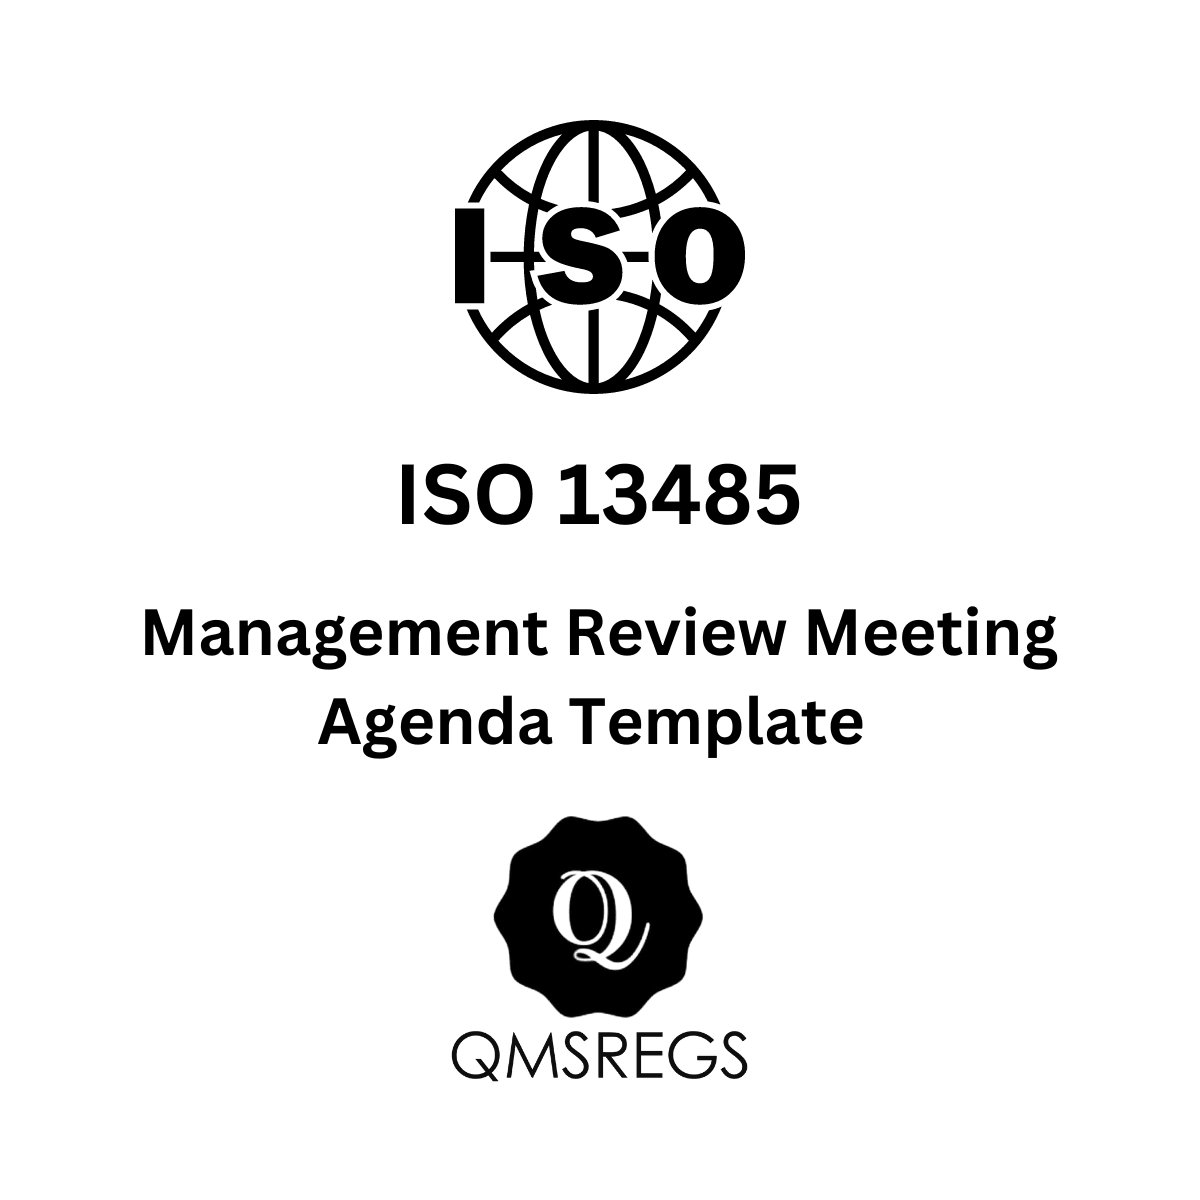 ISO 13485 Management Review Meeting Agenda Template